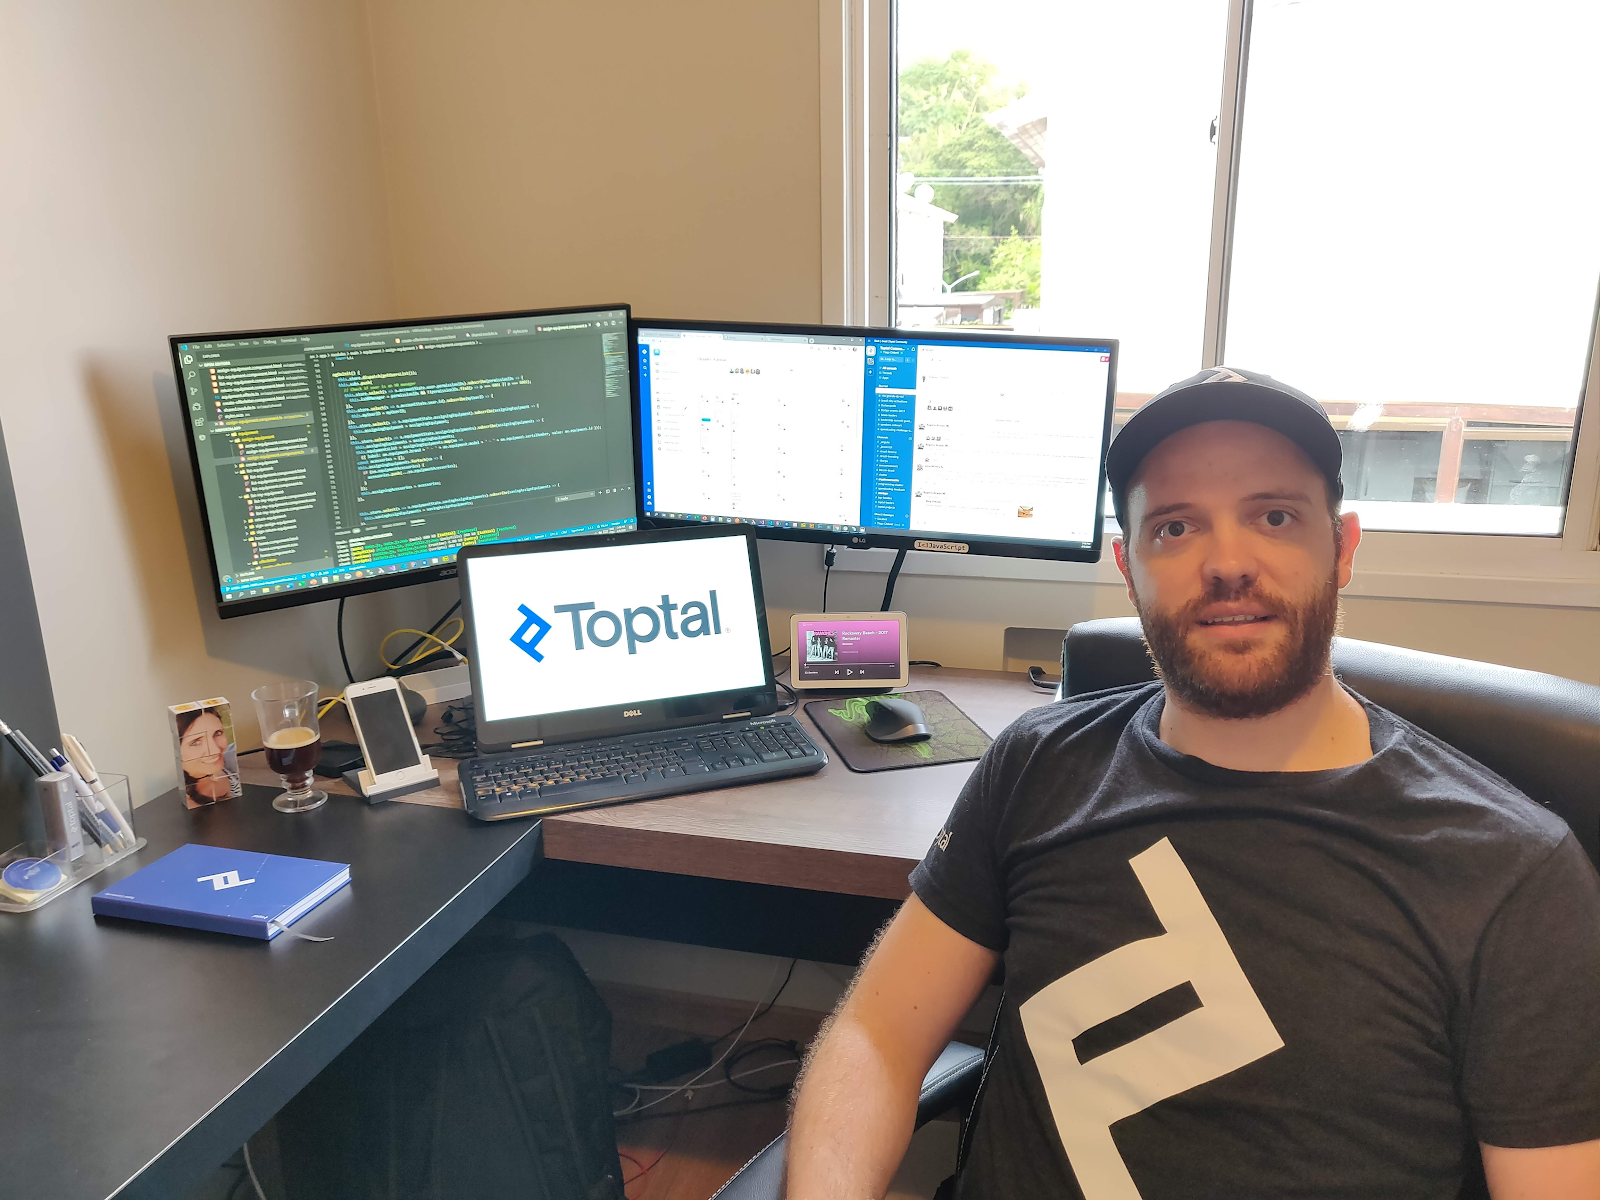 Tiago Chilanti, developer at Toptal, sitting at his remote workspace, bright daylight showing through the window behind him